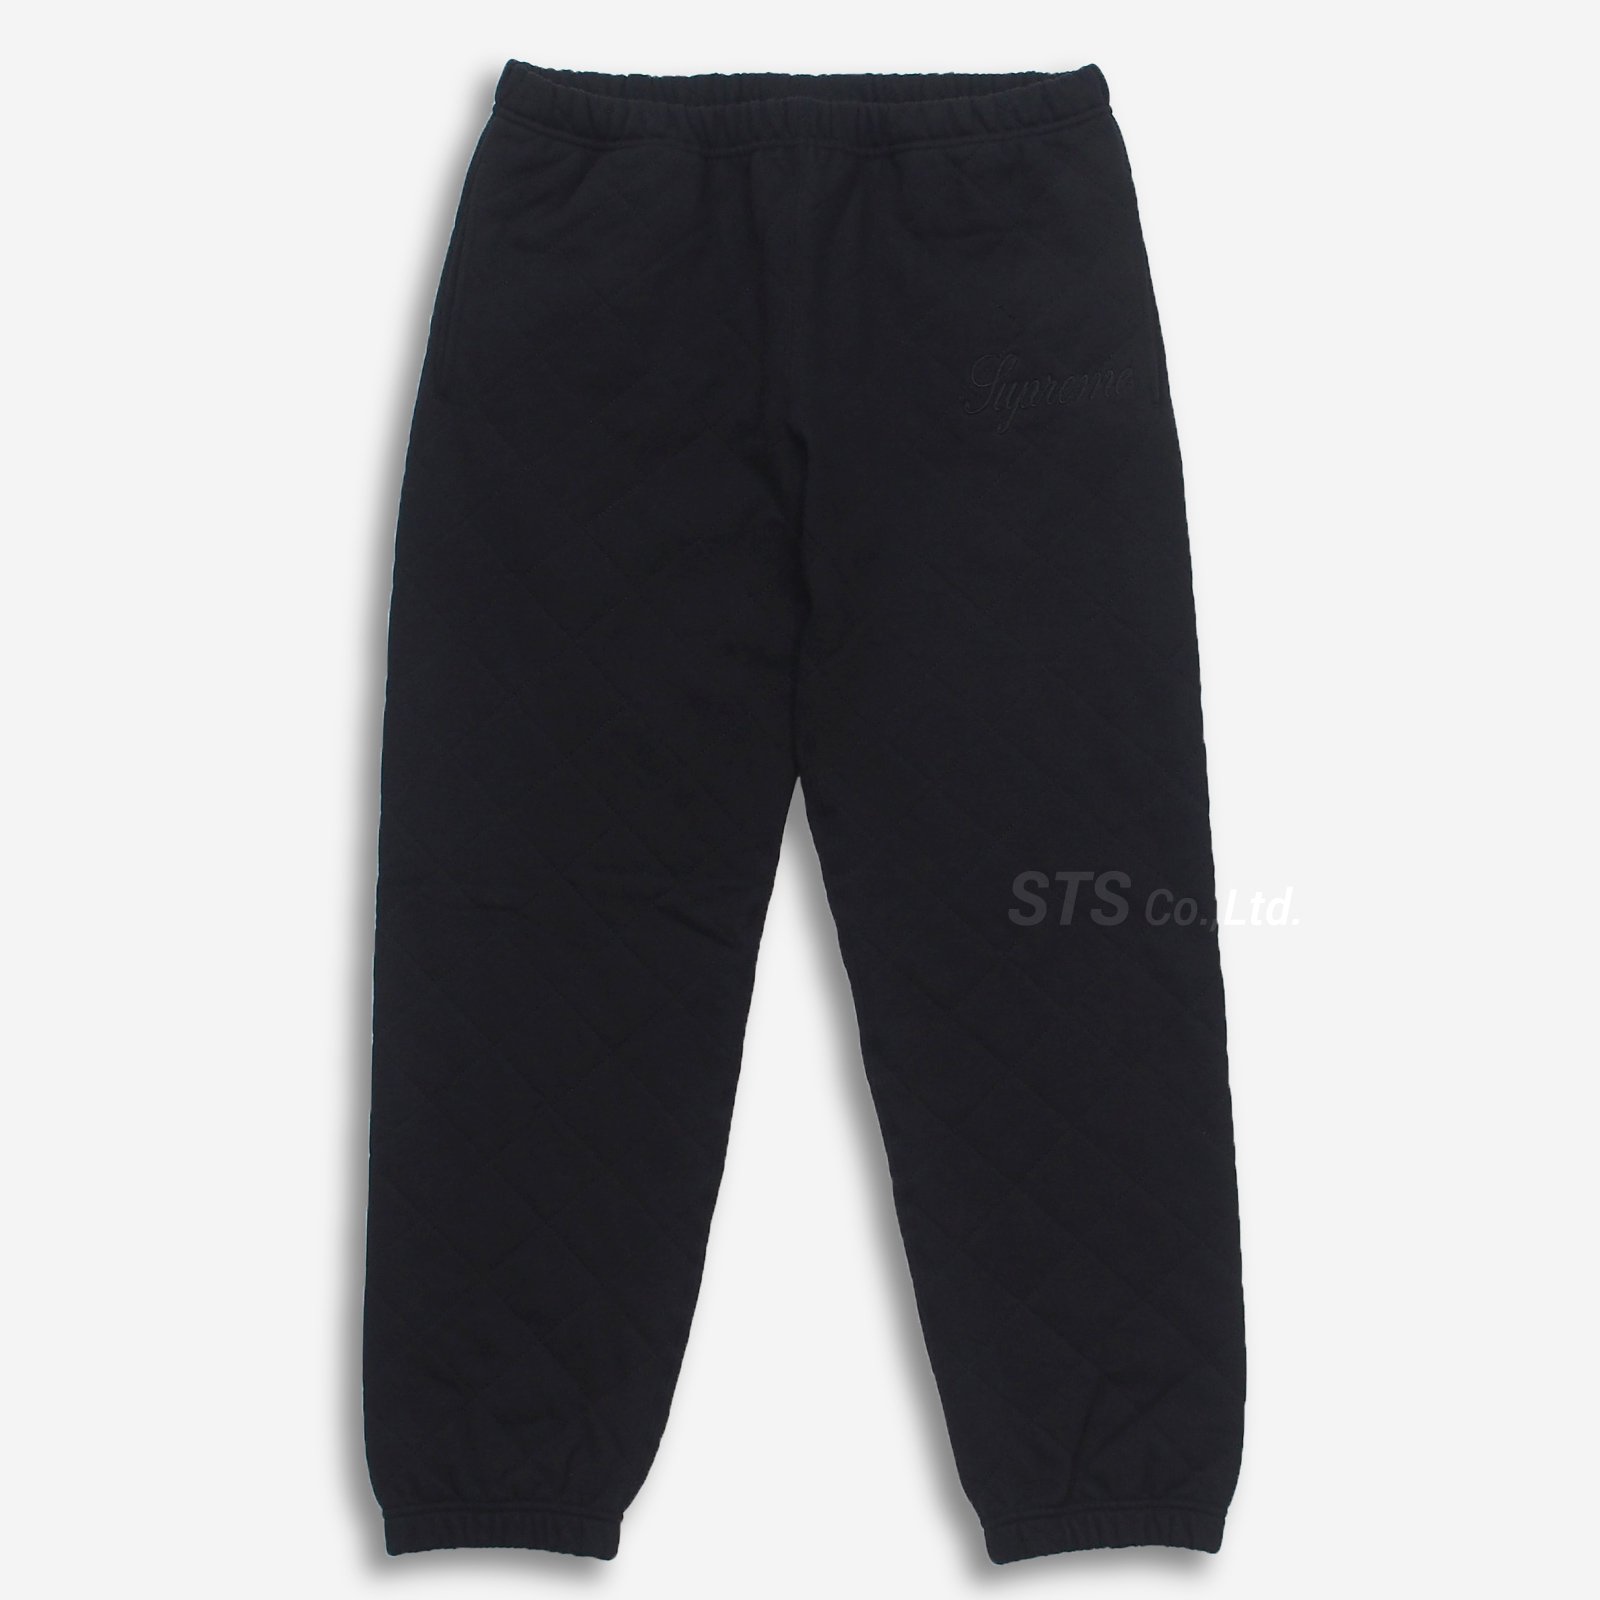 supreme quilted sweatpant